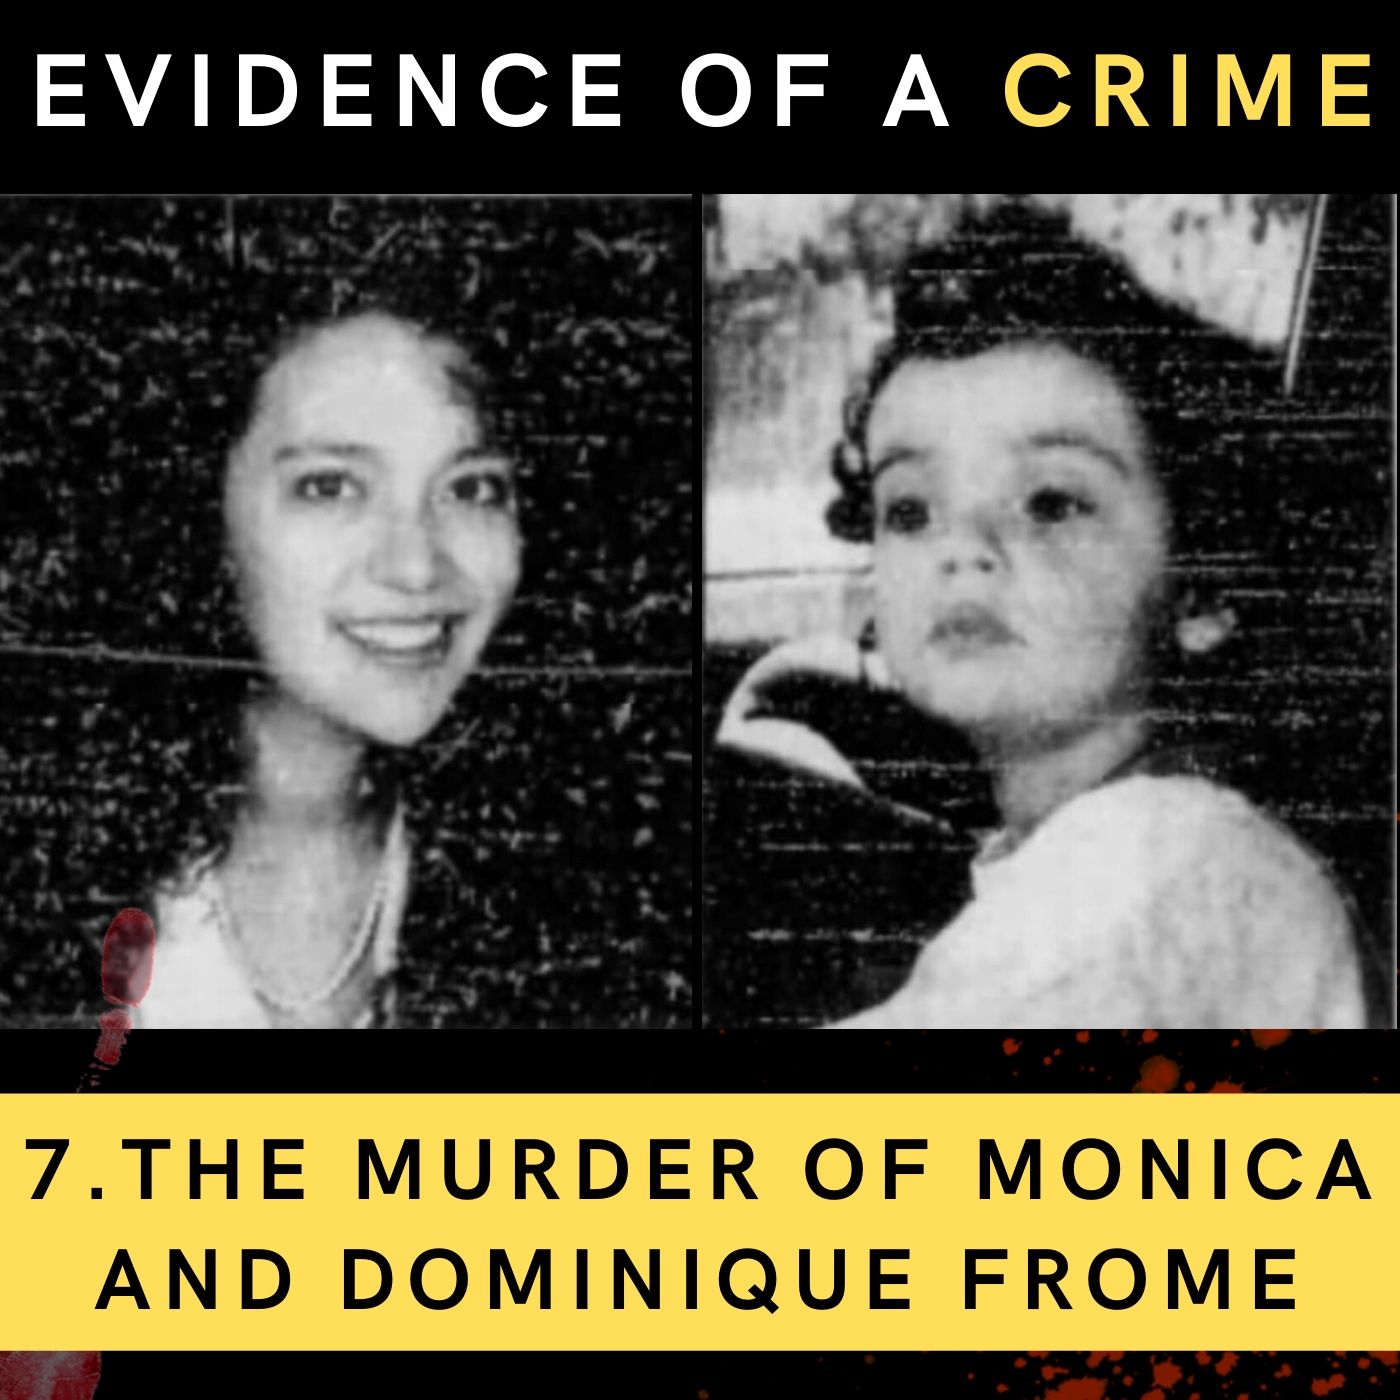 7. The Murder of Monica and Dominique Frome